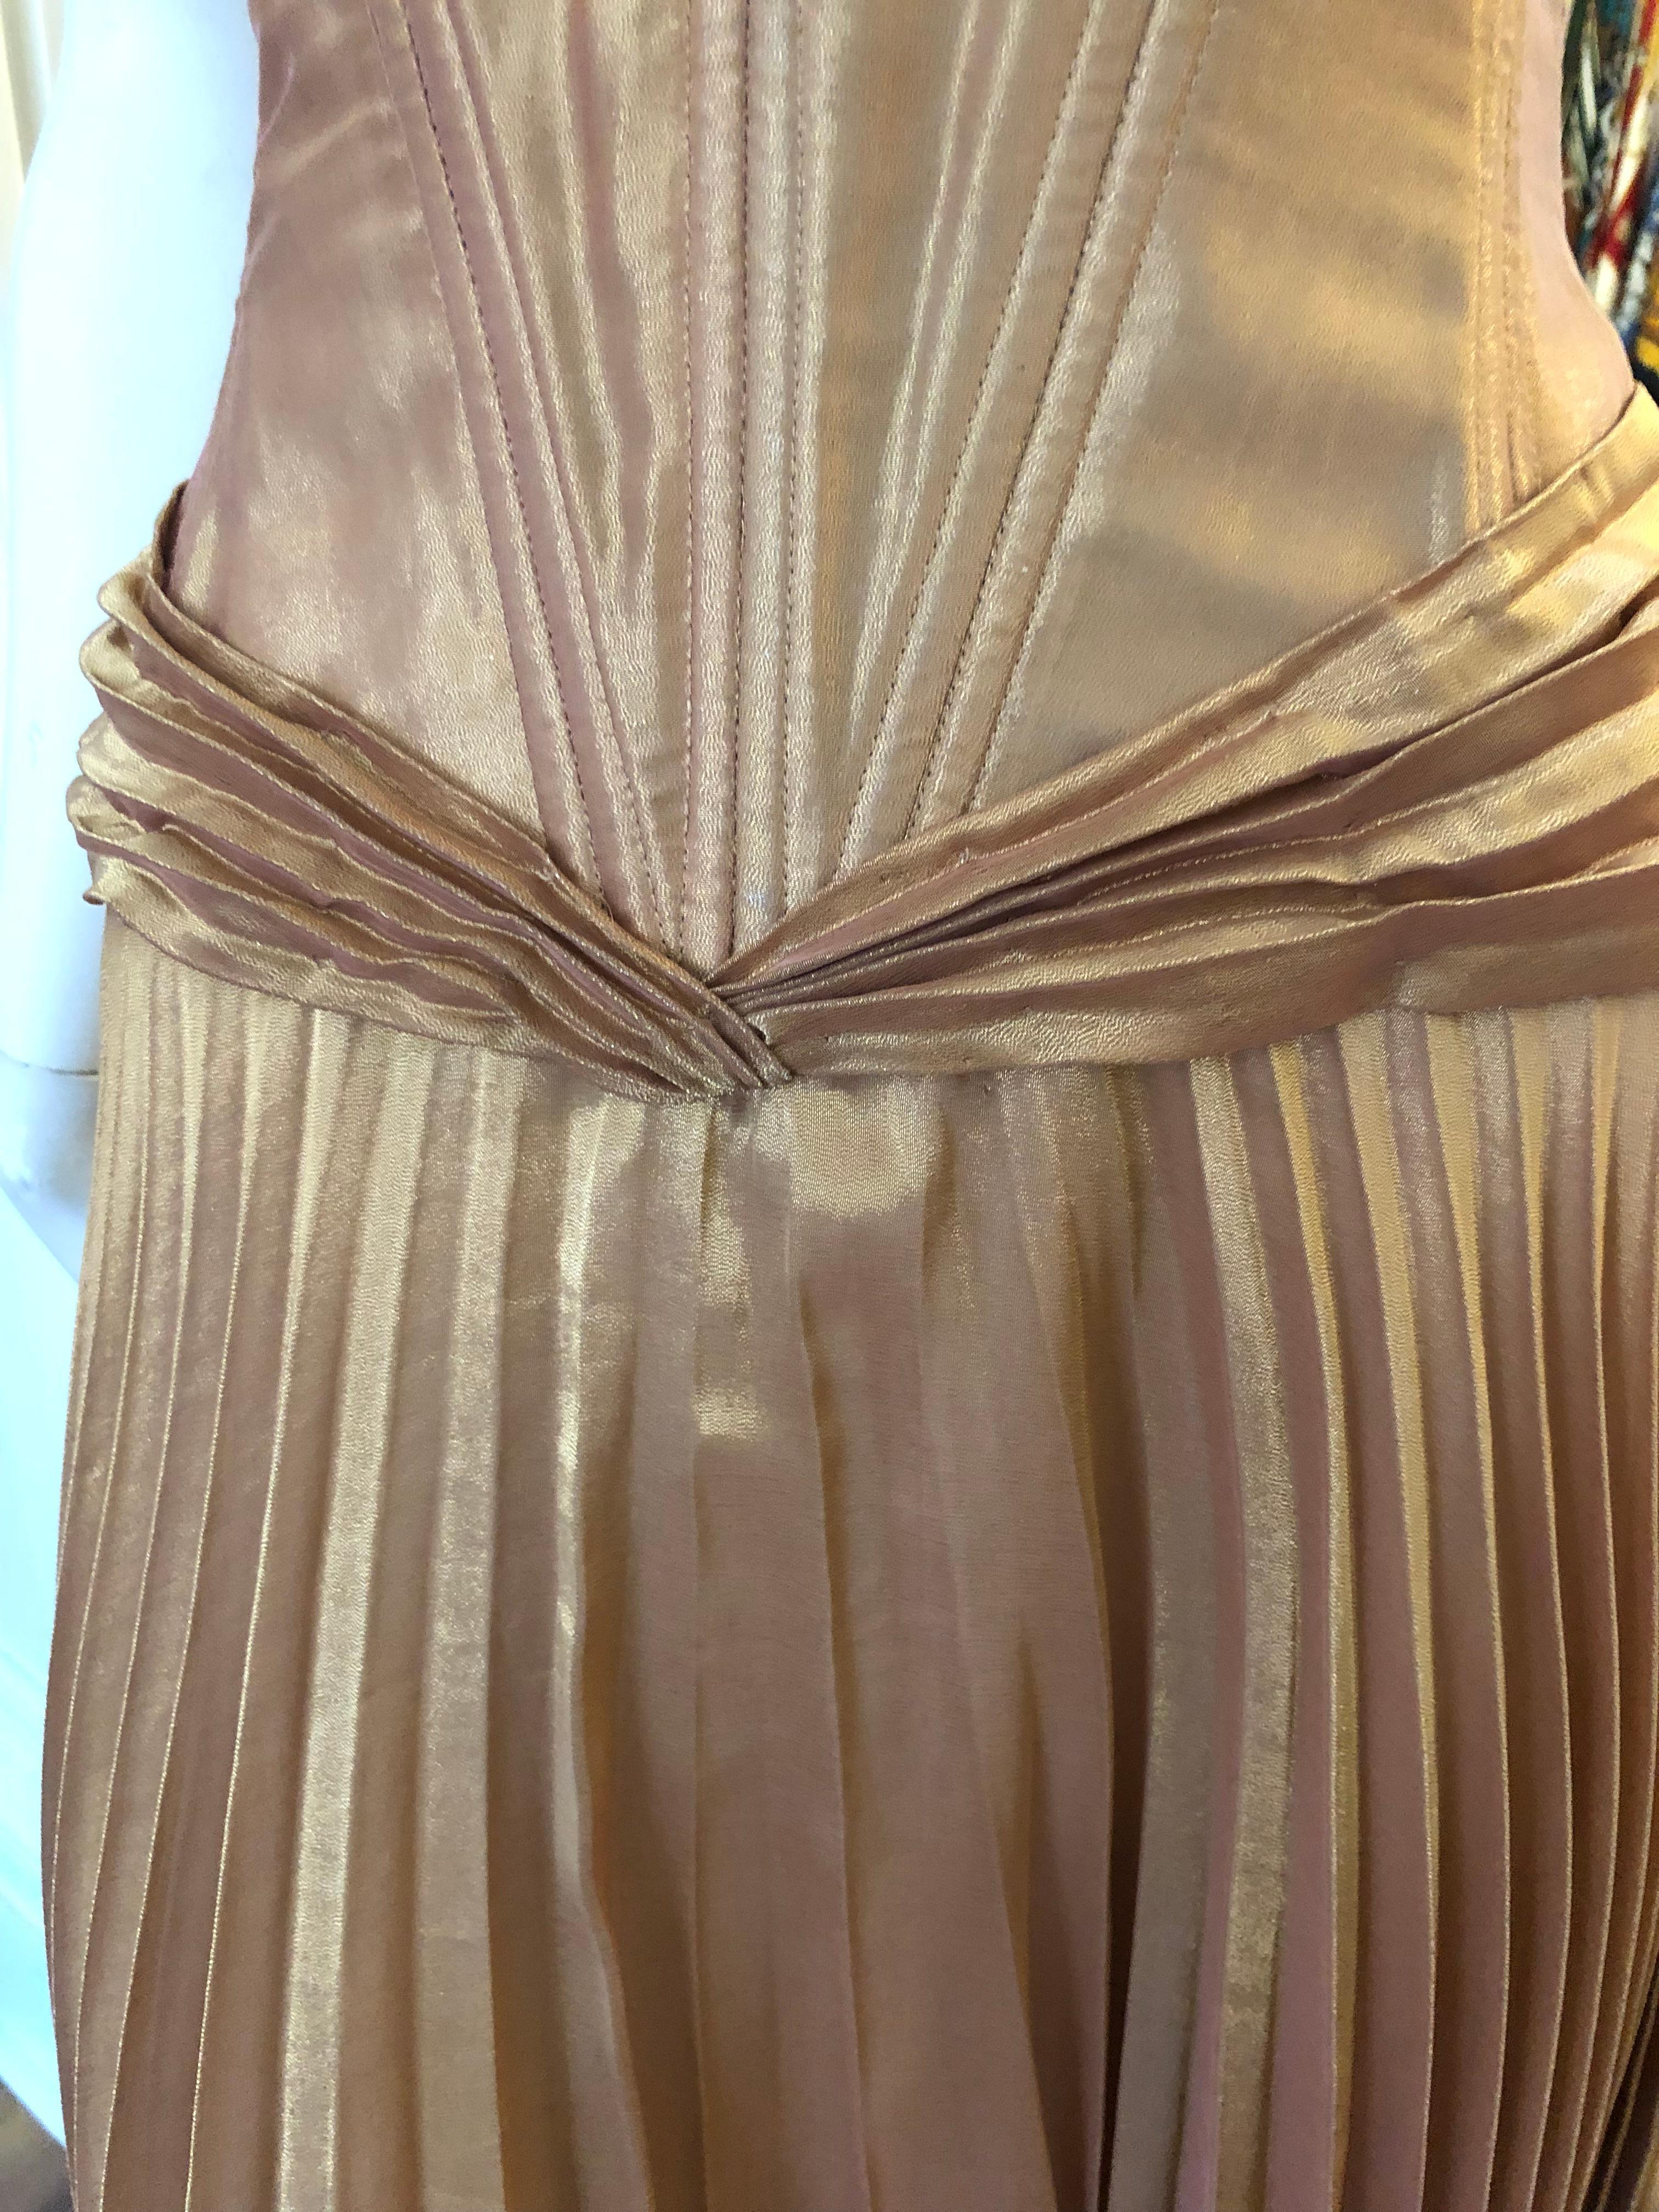 Brown Superb 1980s Vicky Tiel Couture Metallic Gold Lame Dress with Bolero (38) For Sale